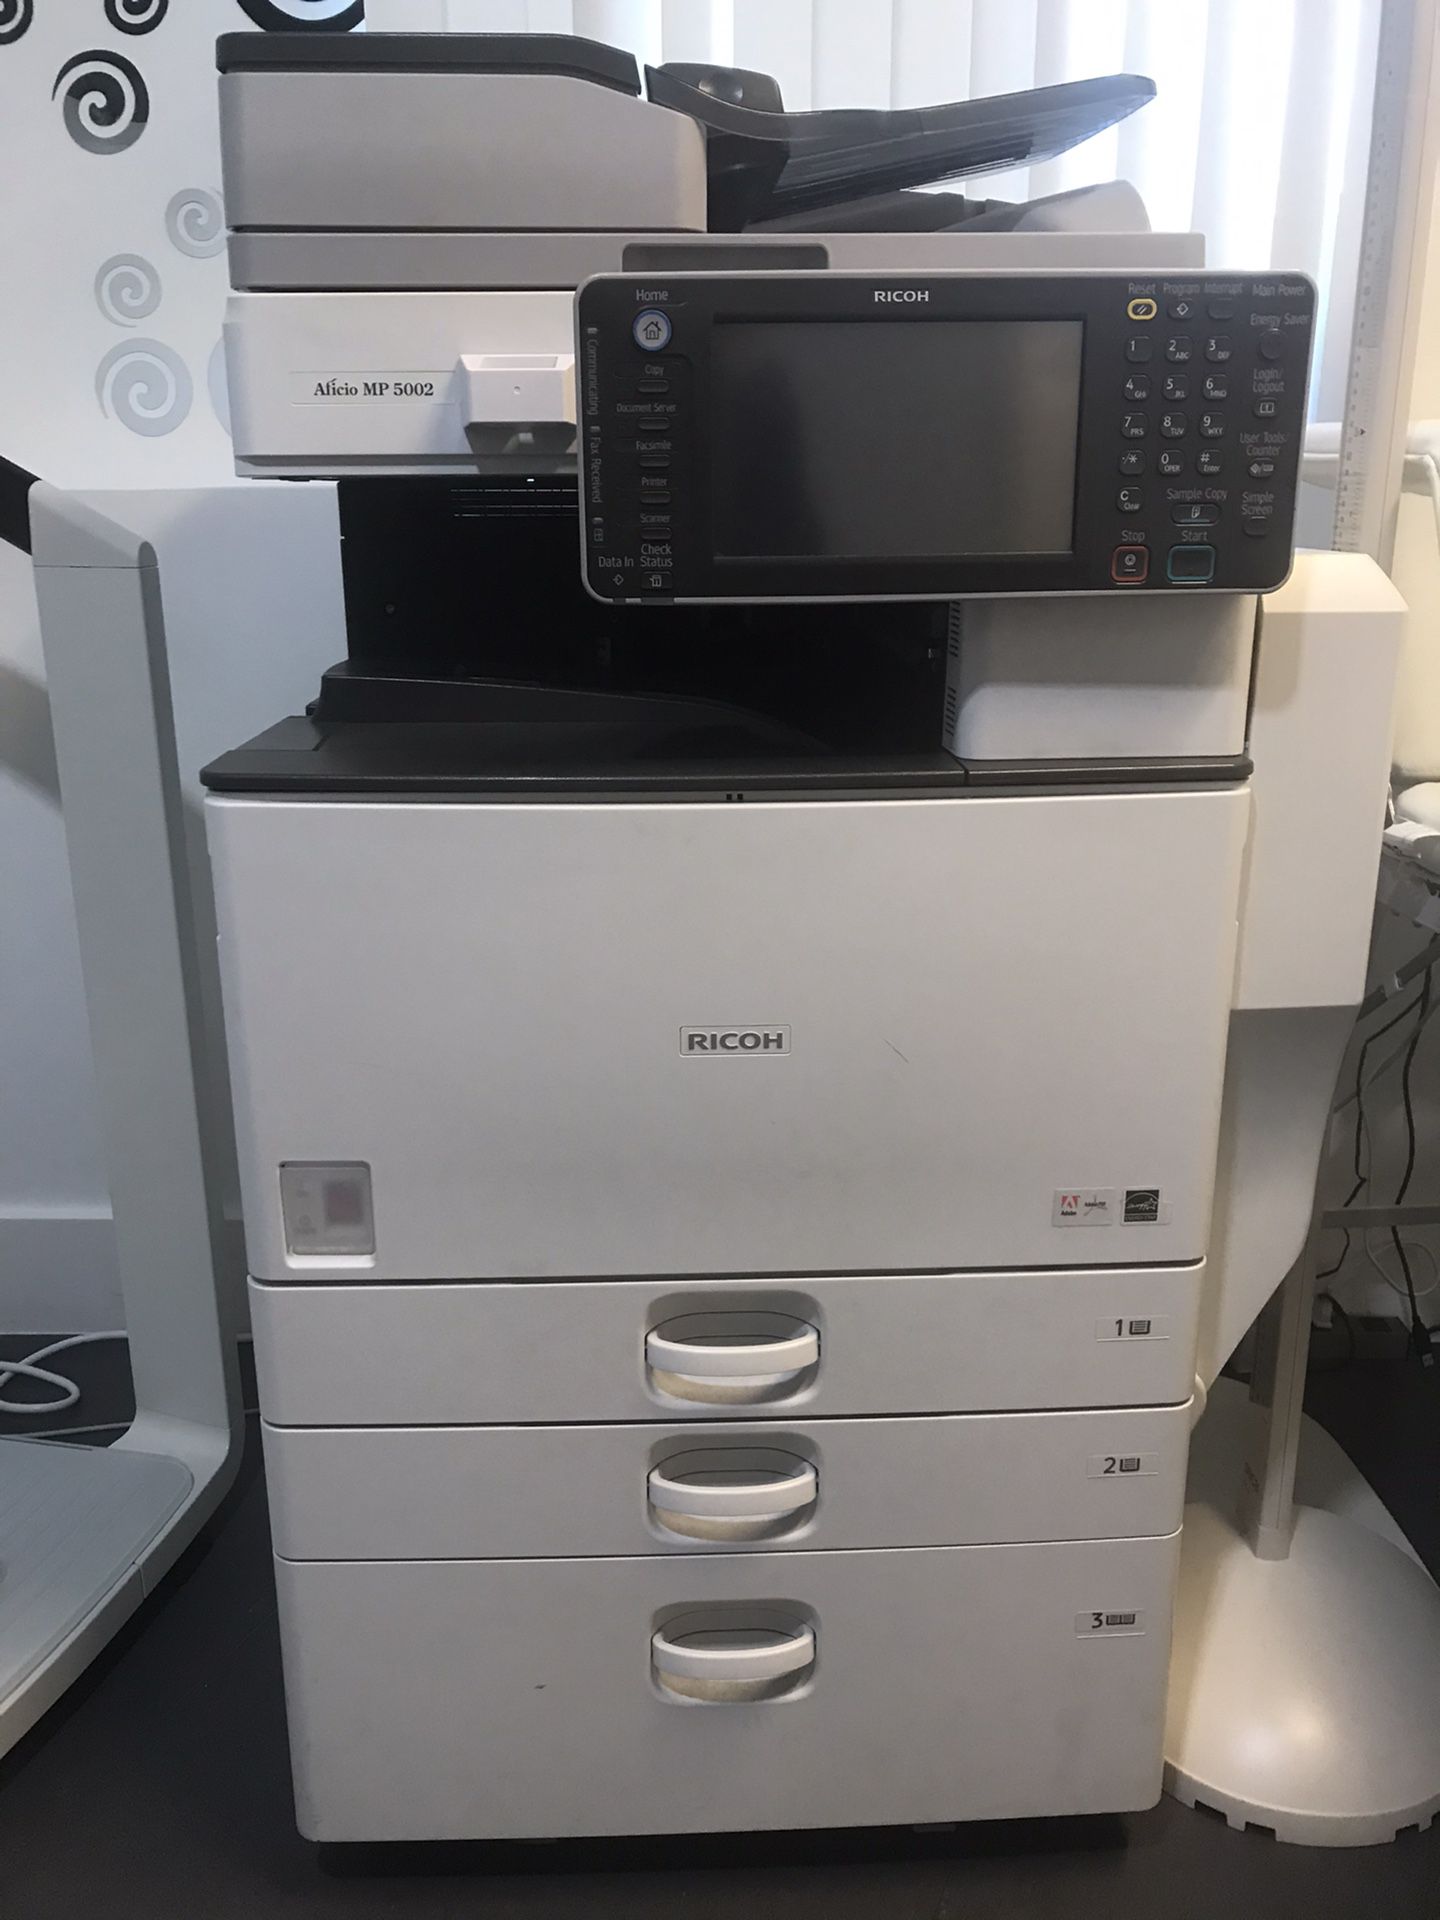 Printer with scanning